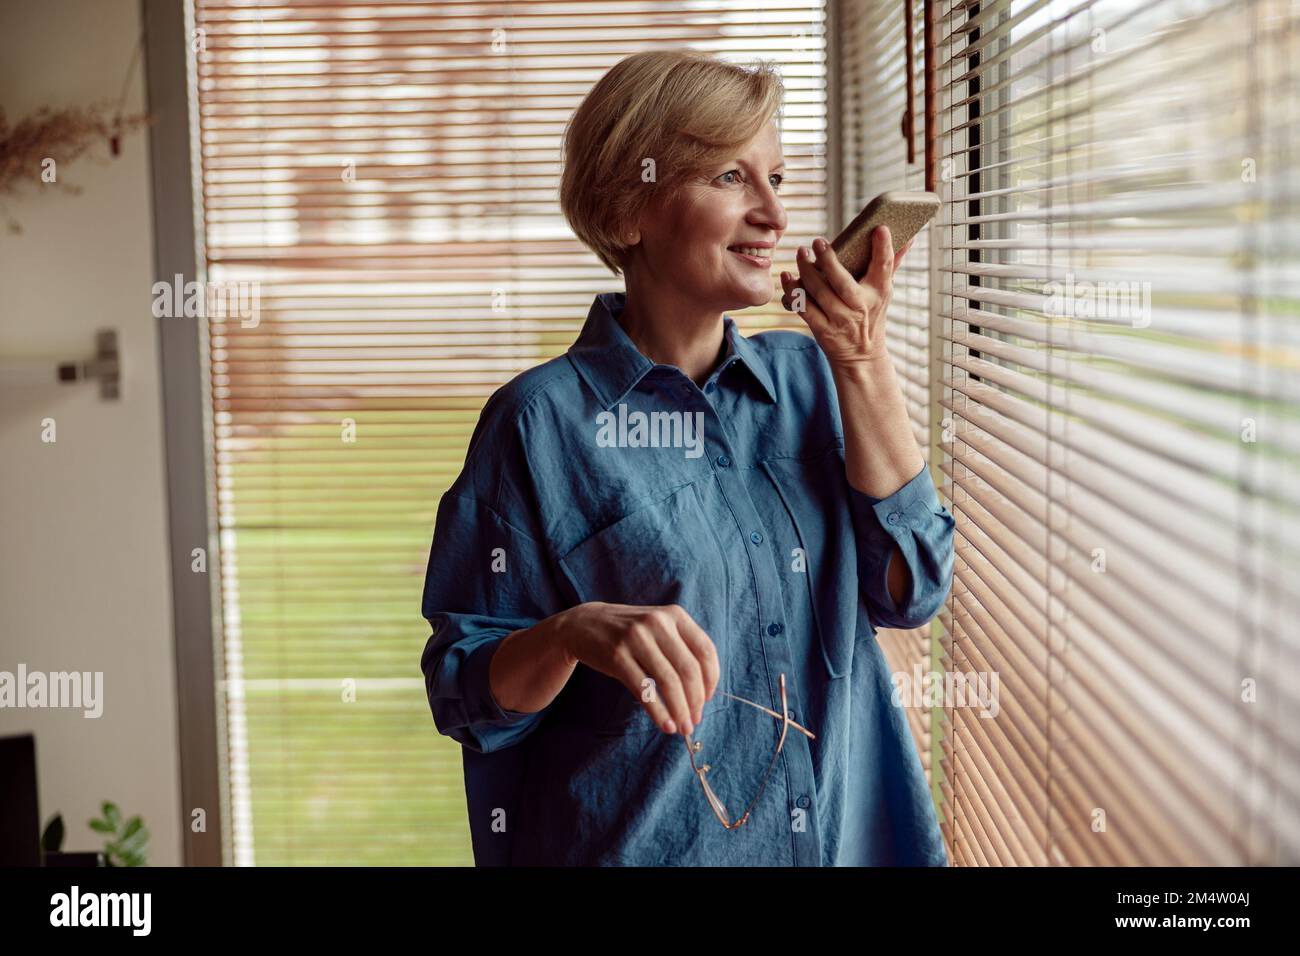 Middle aged woman recording audio message or using voicemail mobile function, standing near window Stock Photo